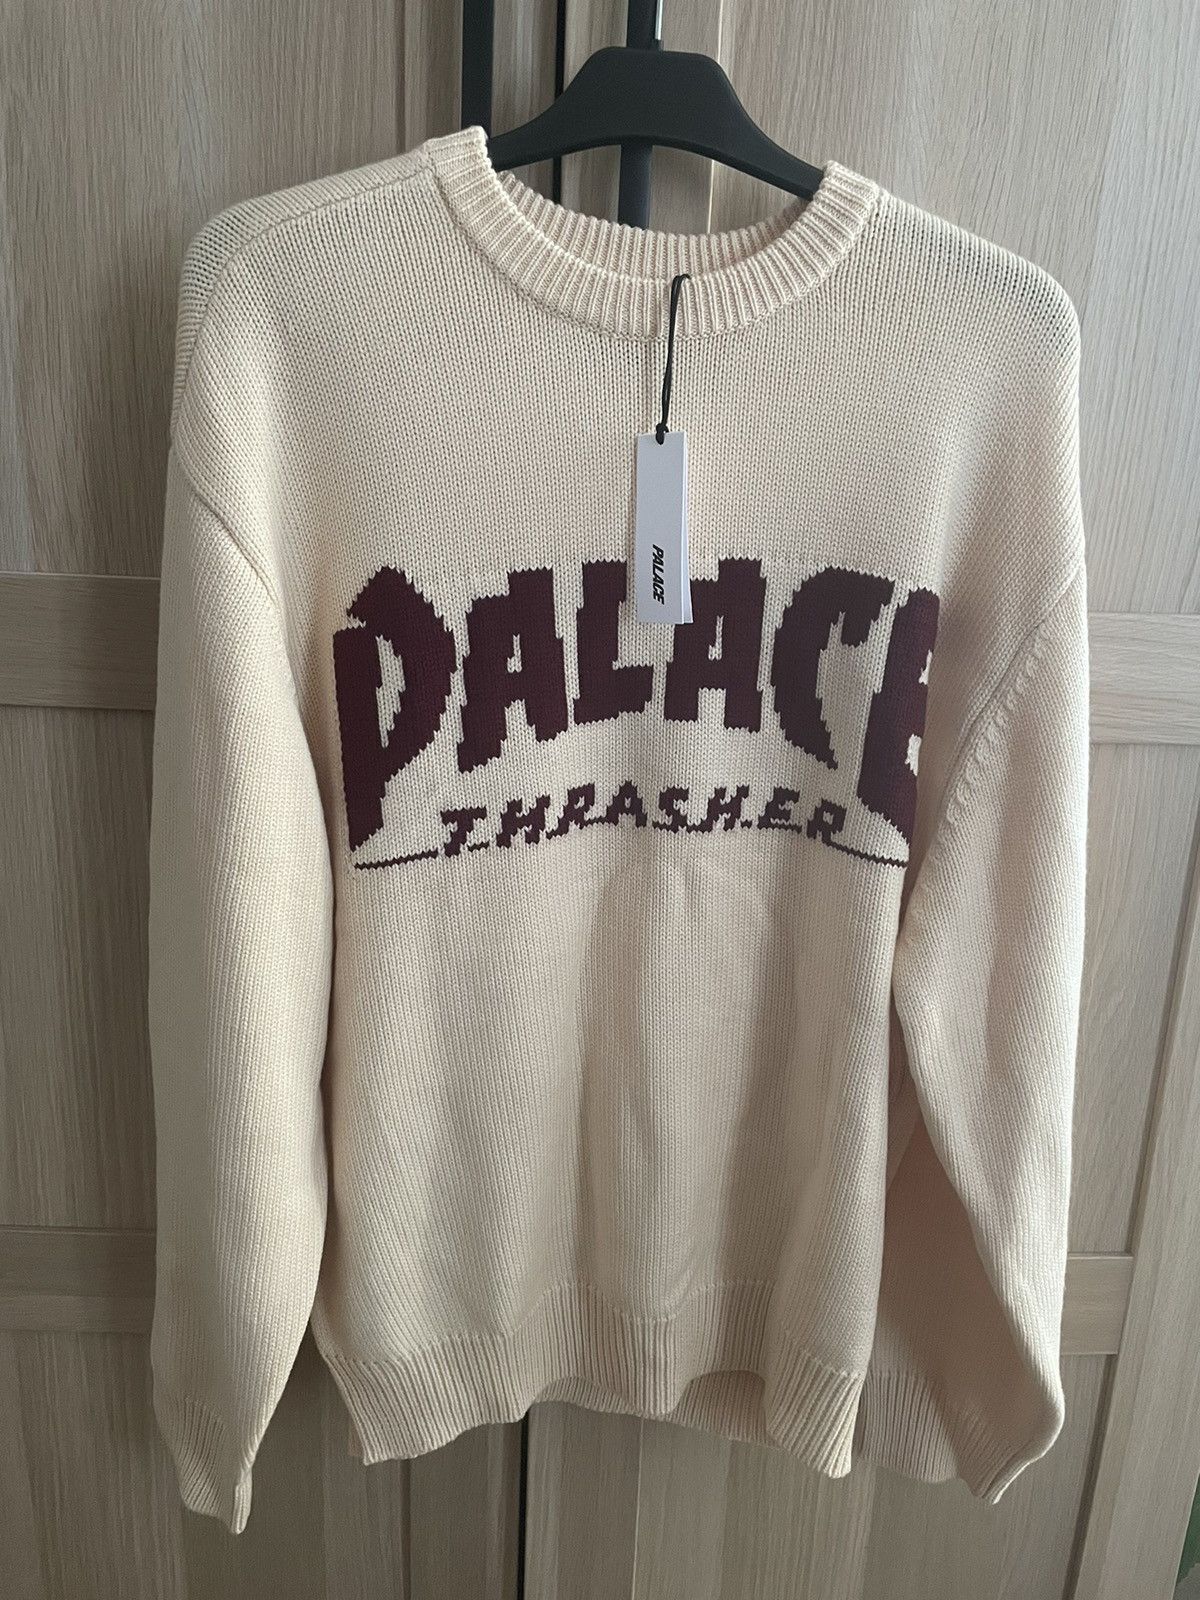 Palace Palace Thrasher Knit Off White | Grailed